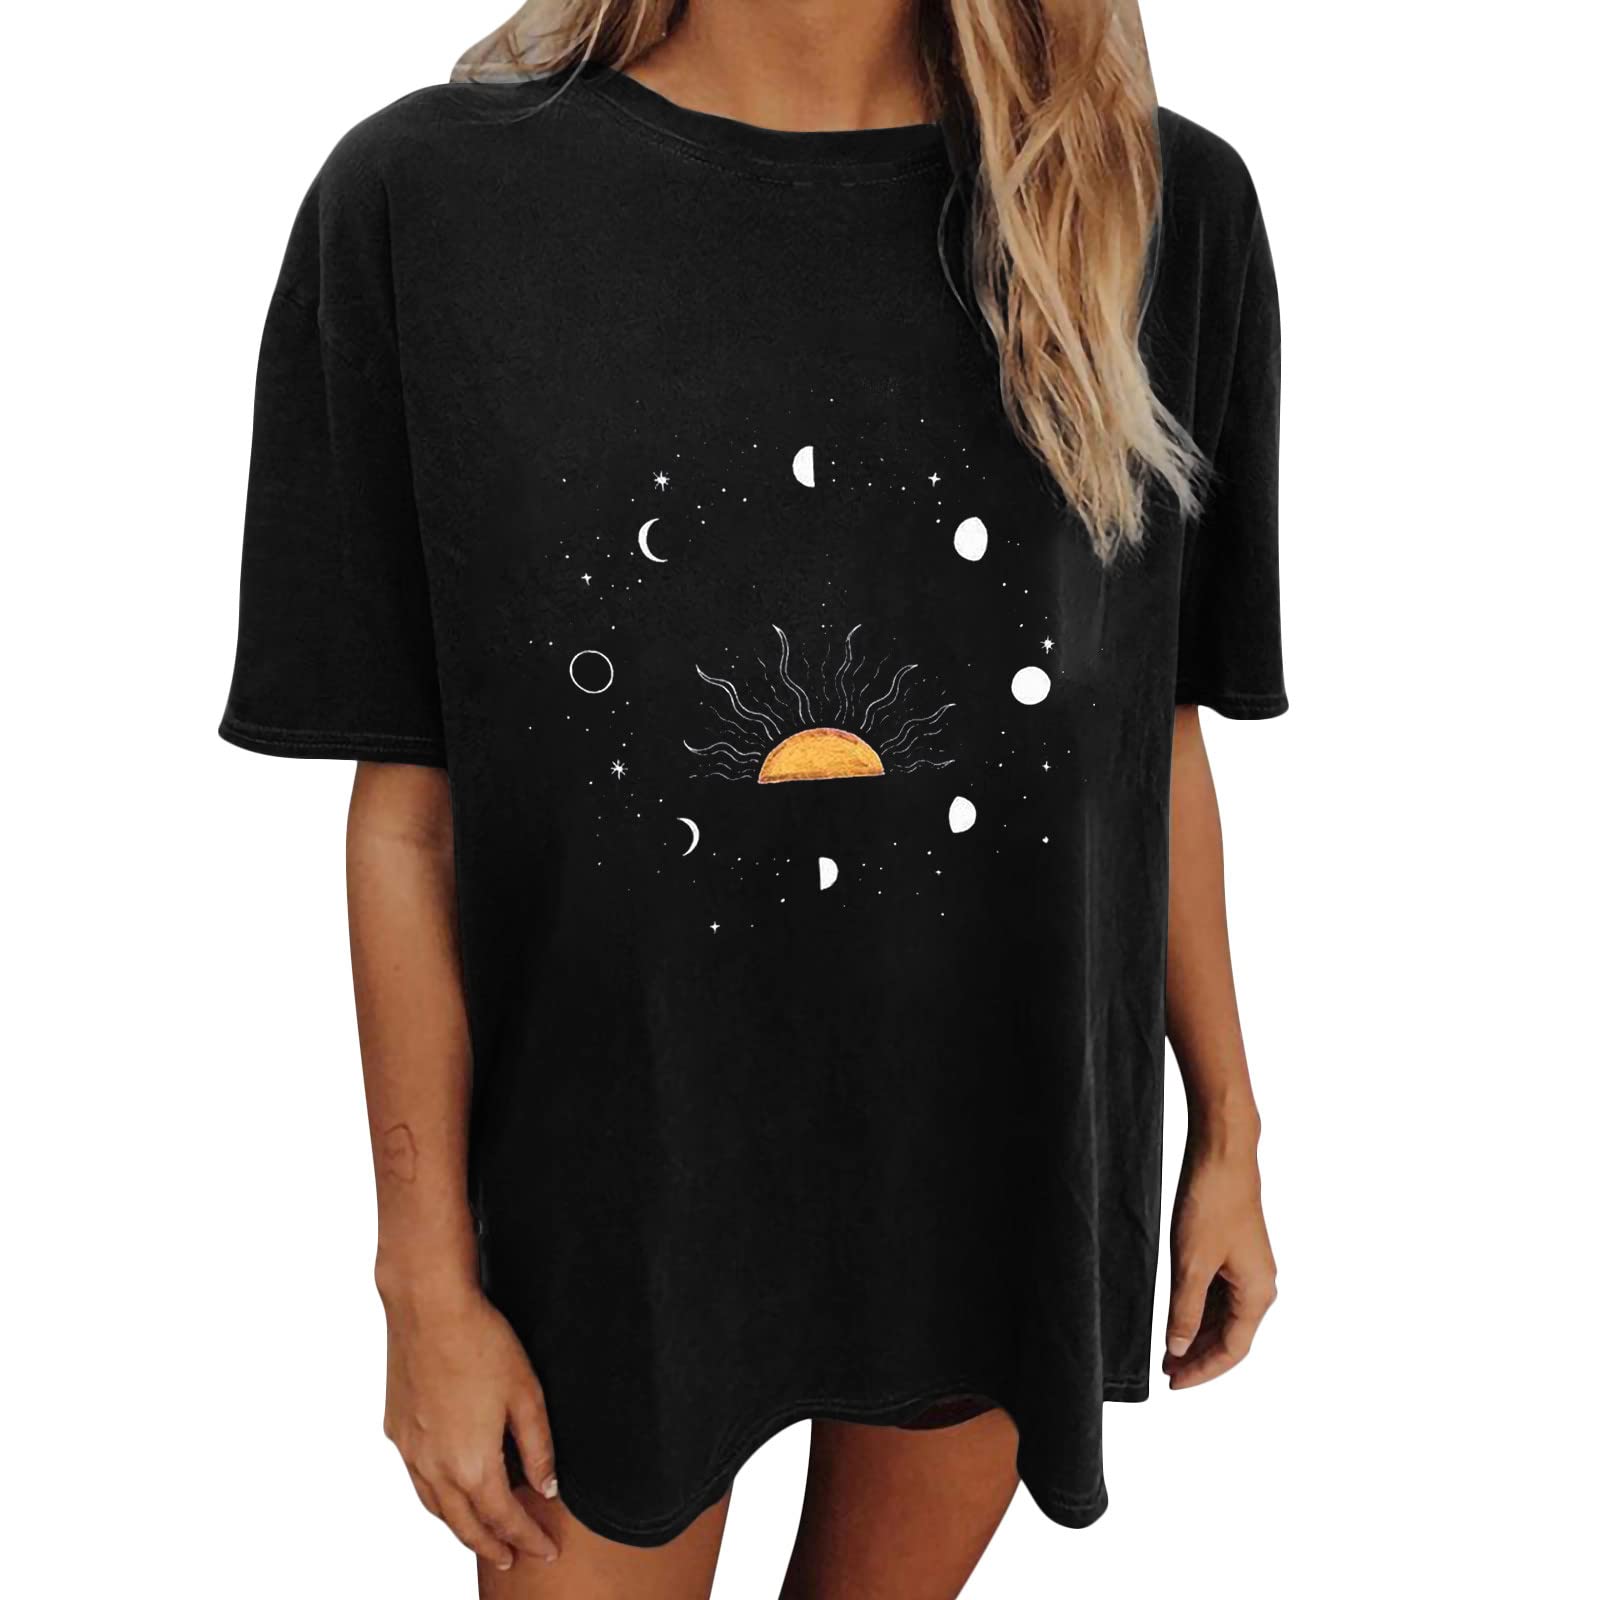 Oversized Graphic Tees for Women Vintage Baggy T Shirts Summer Y2K